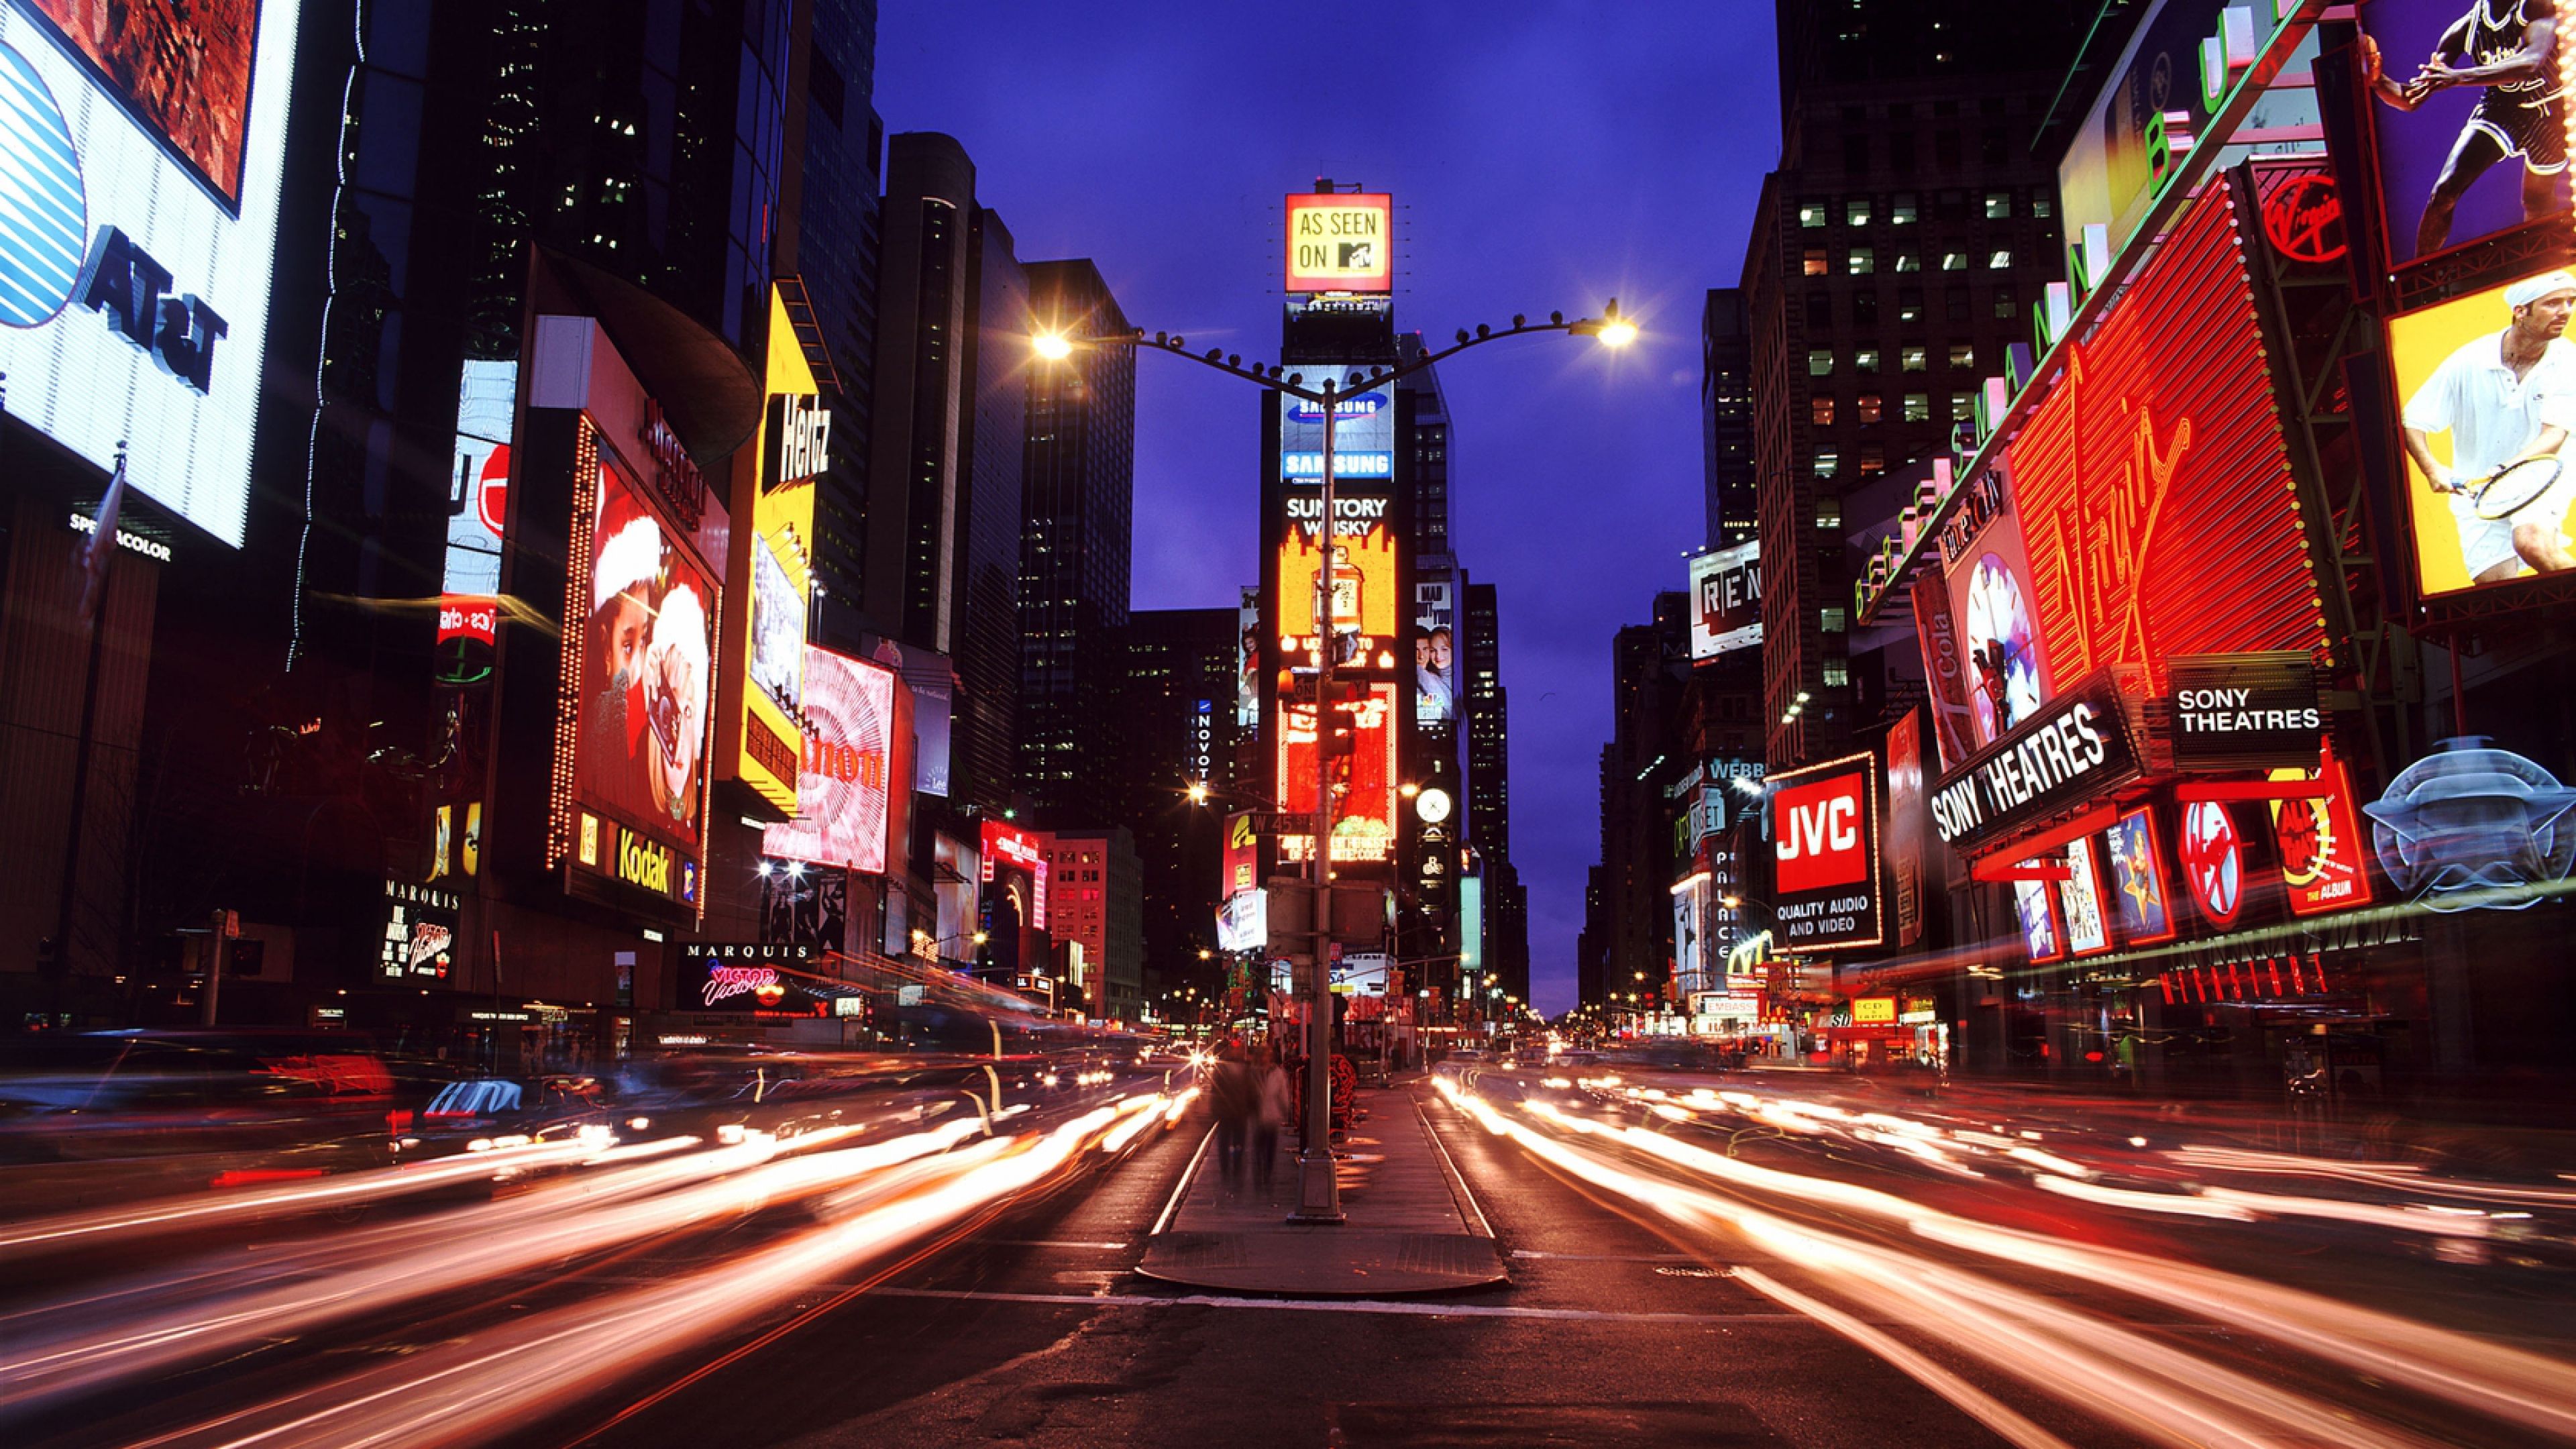 Download Wallpaper 3840x2160 New york, Times square, Night city ...